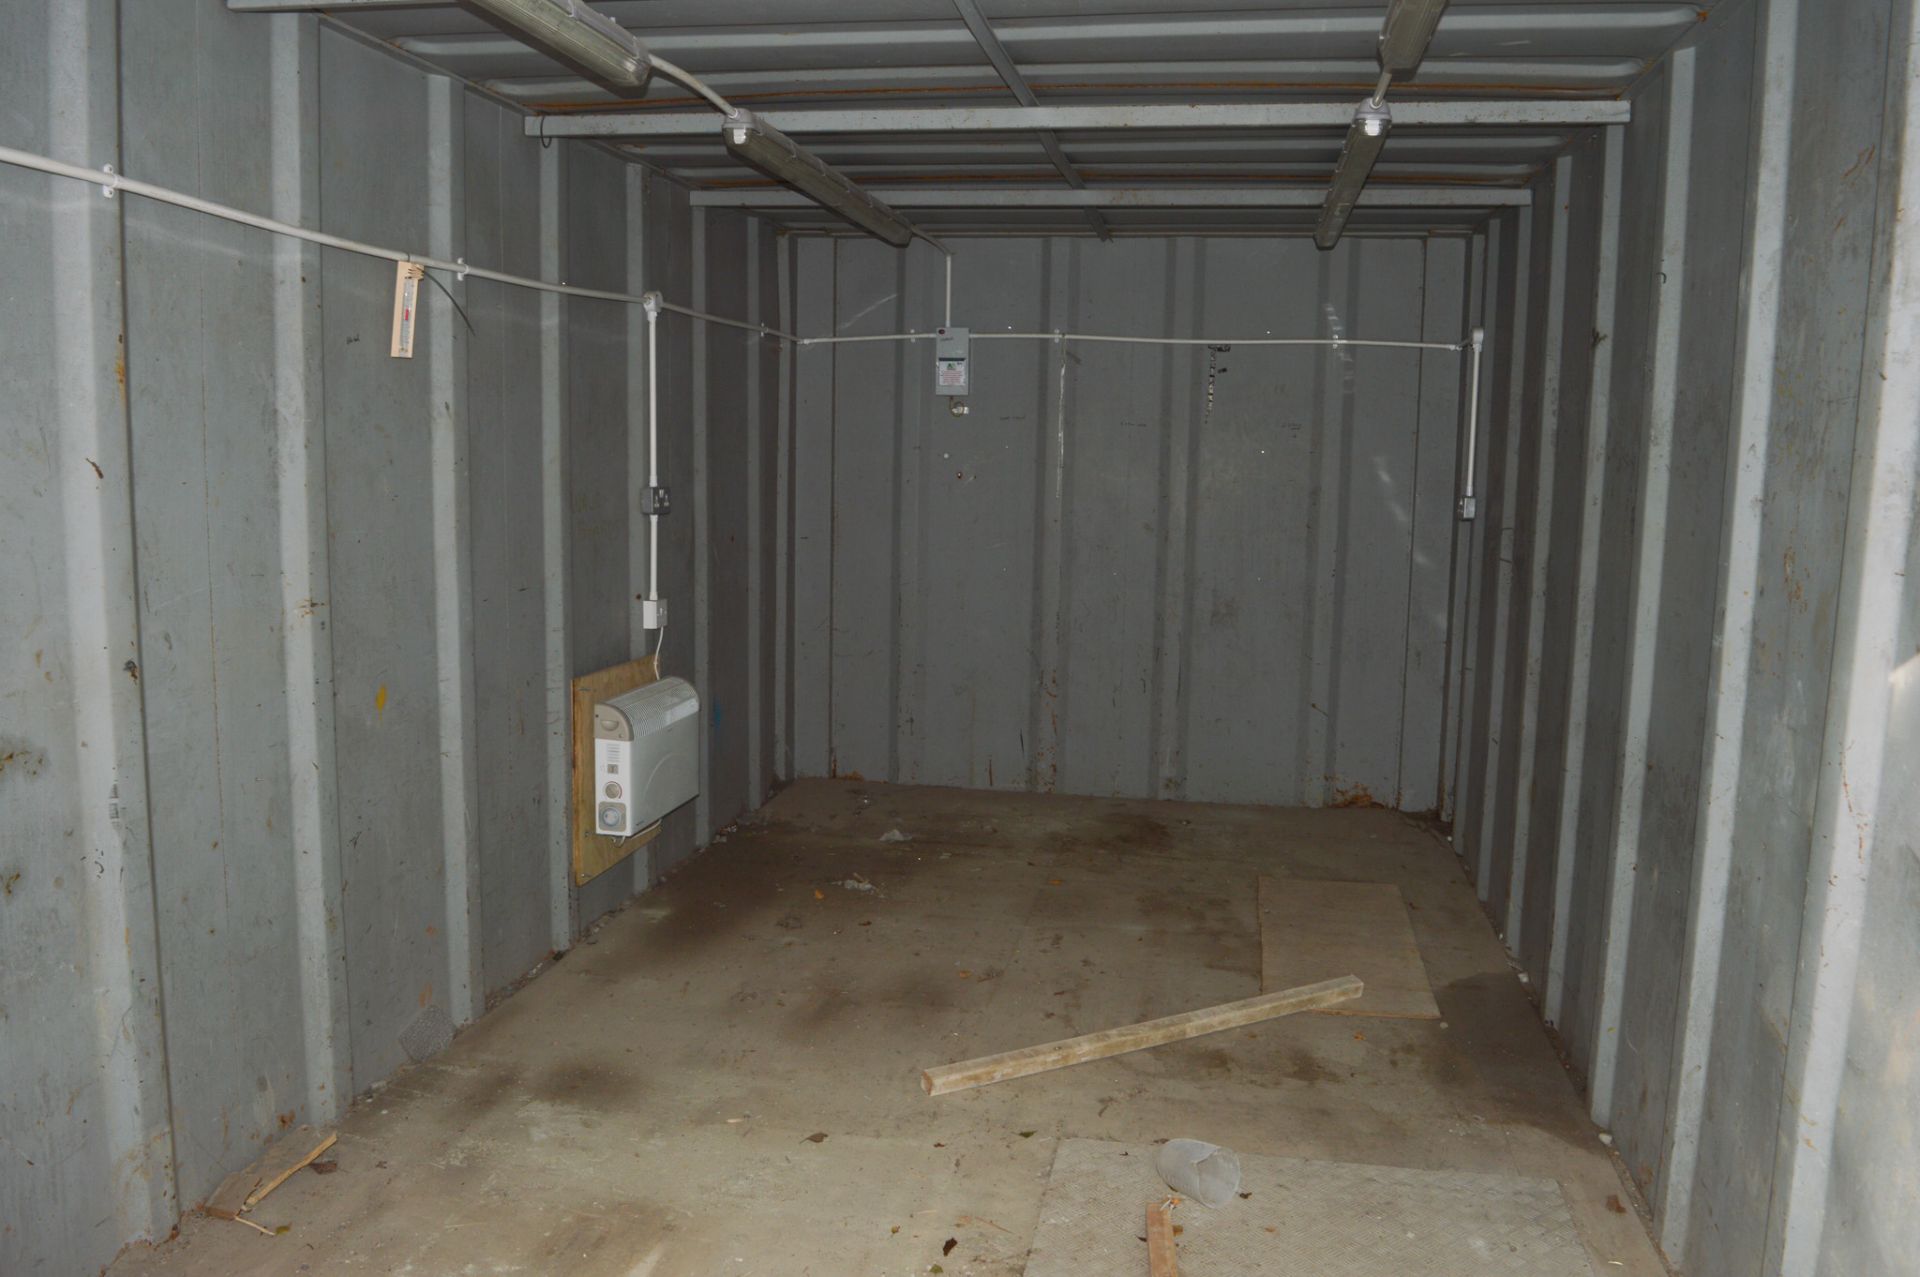 21 ft x 9 ft steel anti vandal shipping container  c/w keys in office  A508242 - Bild 5 aus 6